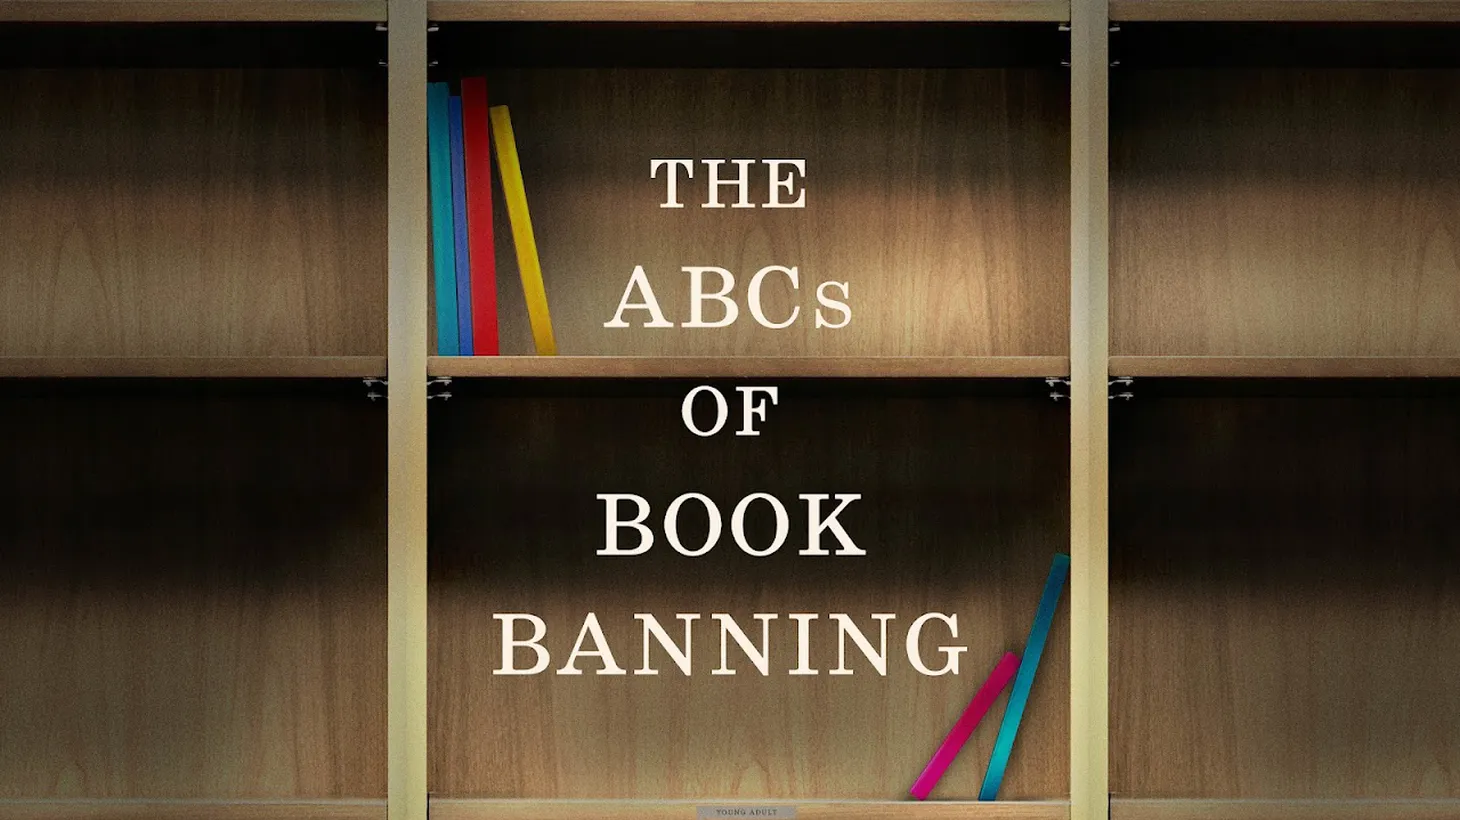 Sheila Nevins’ film “The ABCs of Book Banning” includes interviews with public school kids, who she calls “the littlest victims of these kinds of bannings.”